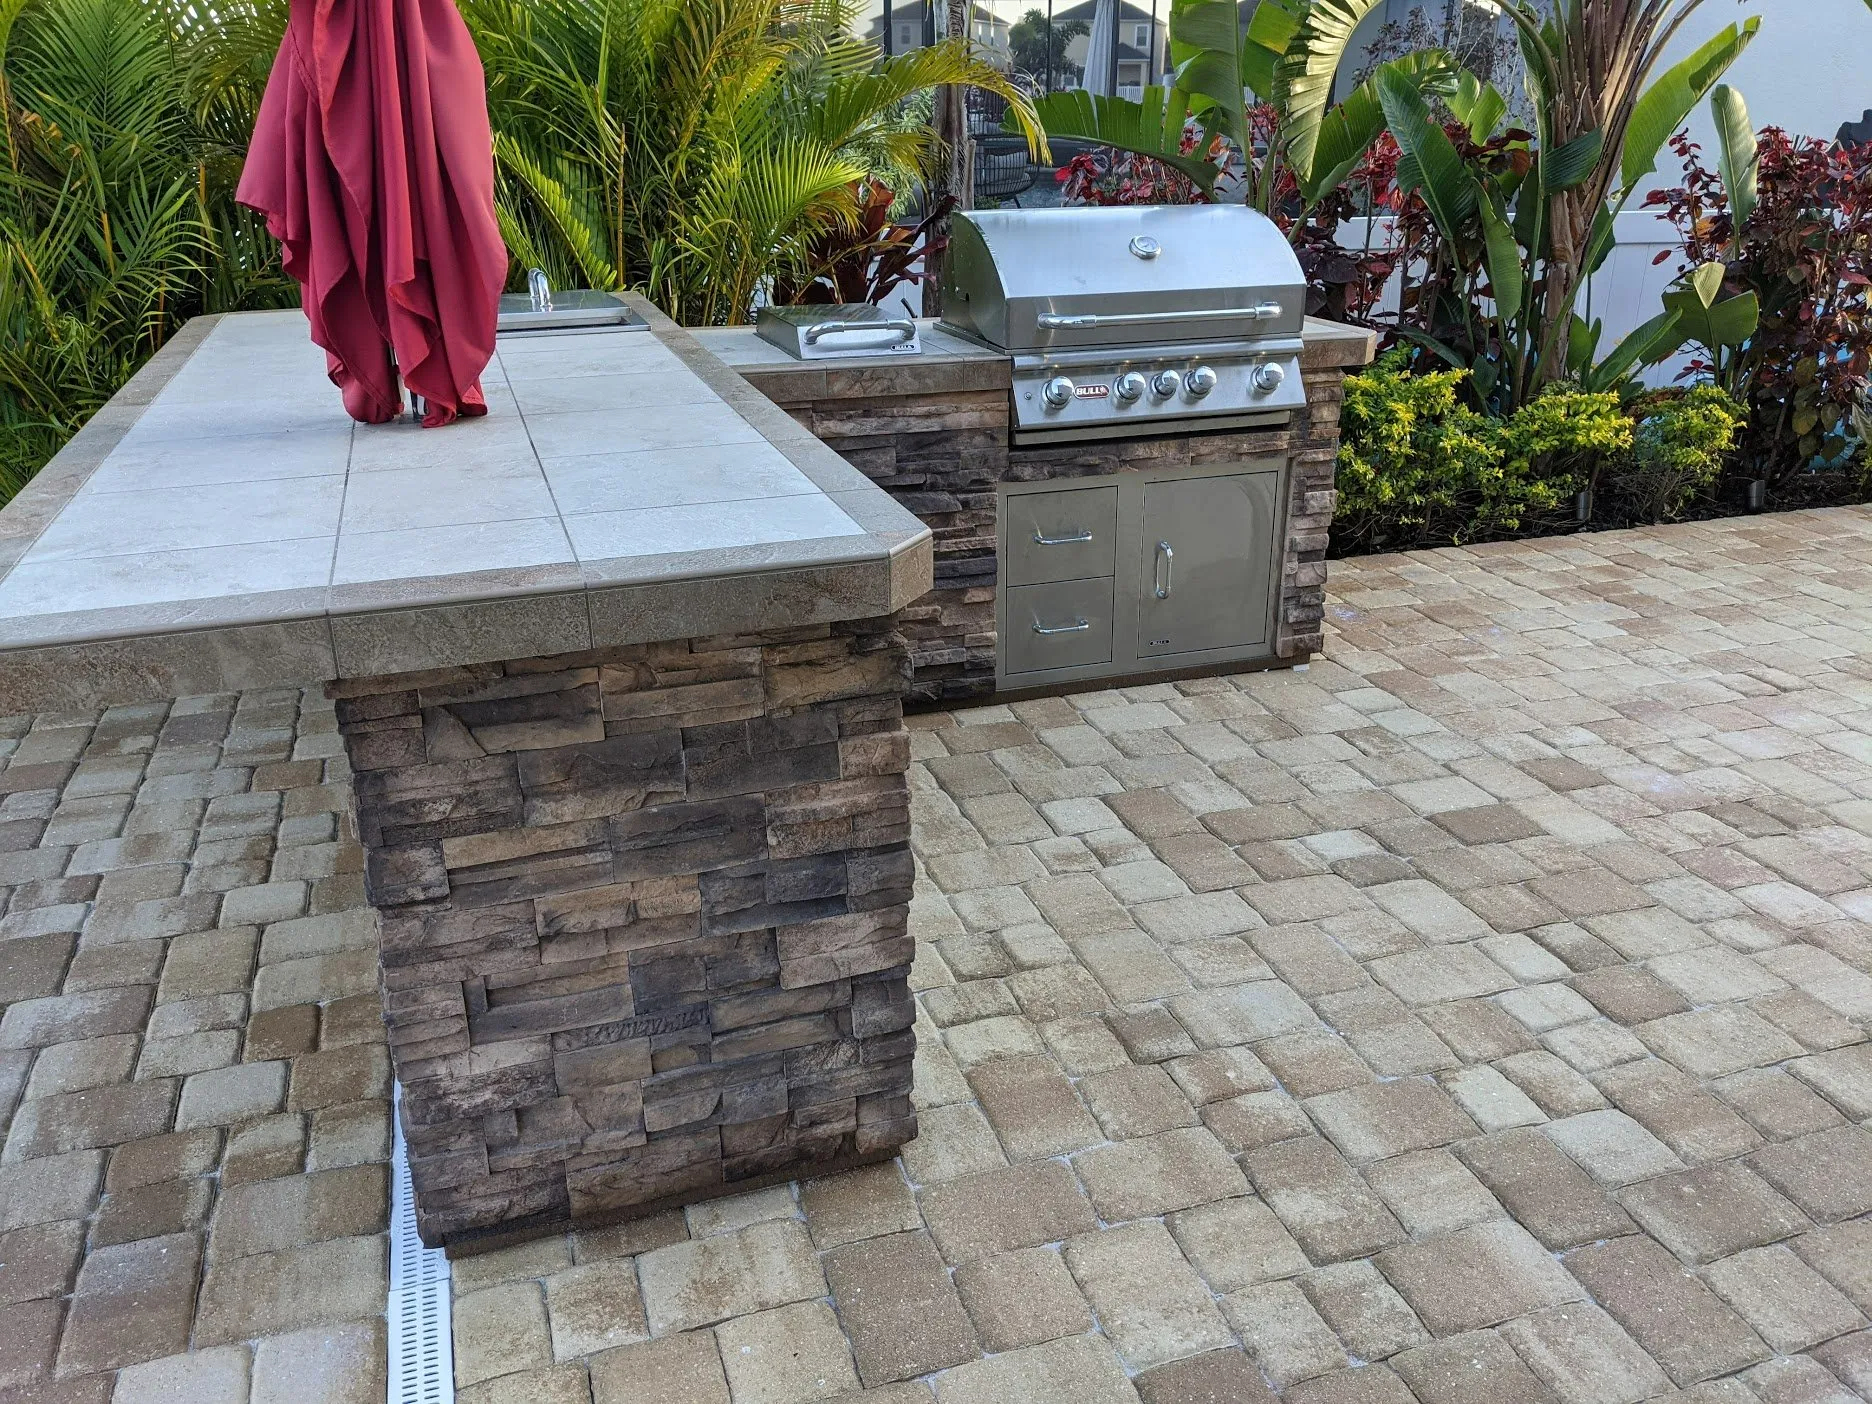 Attractive brick paver patio with grill